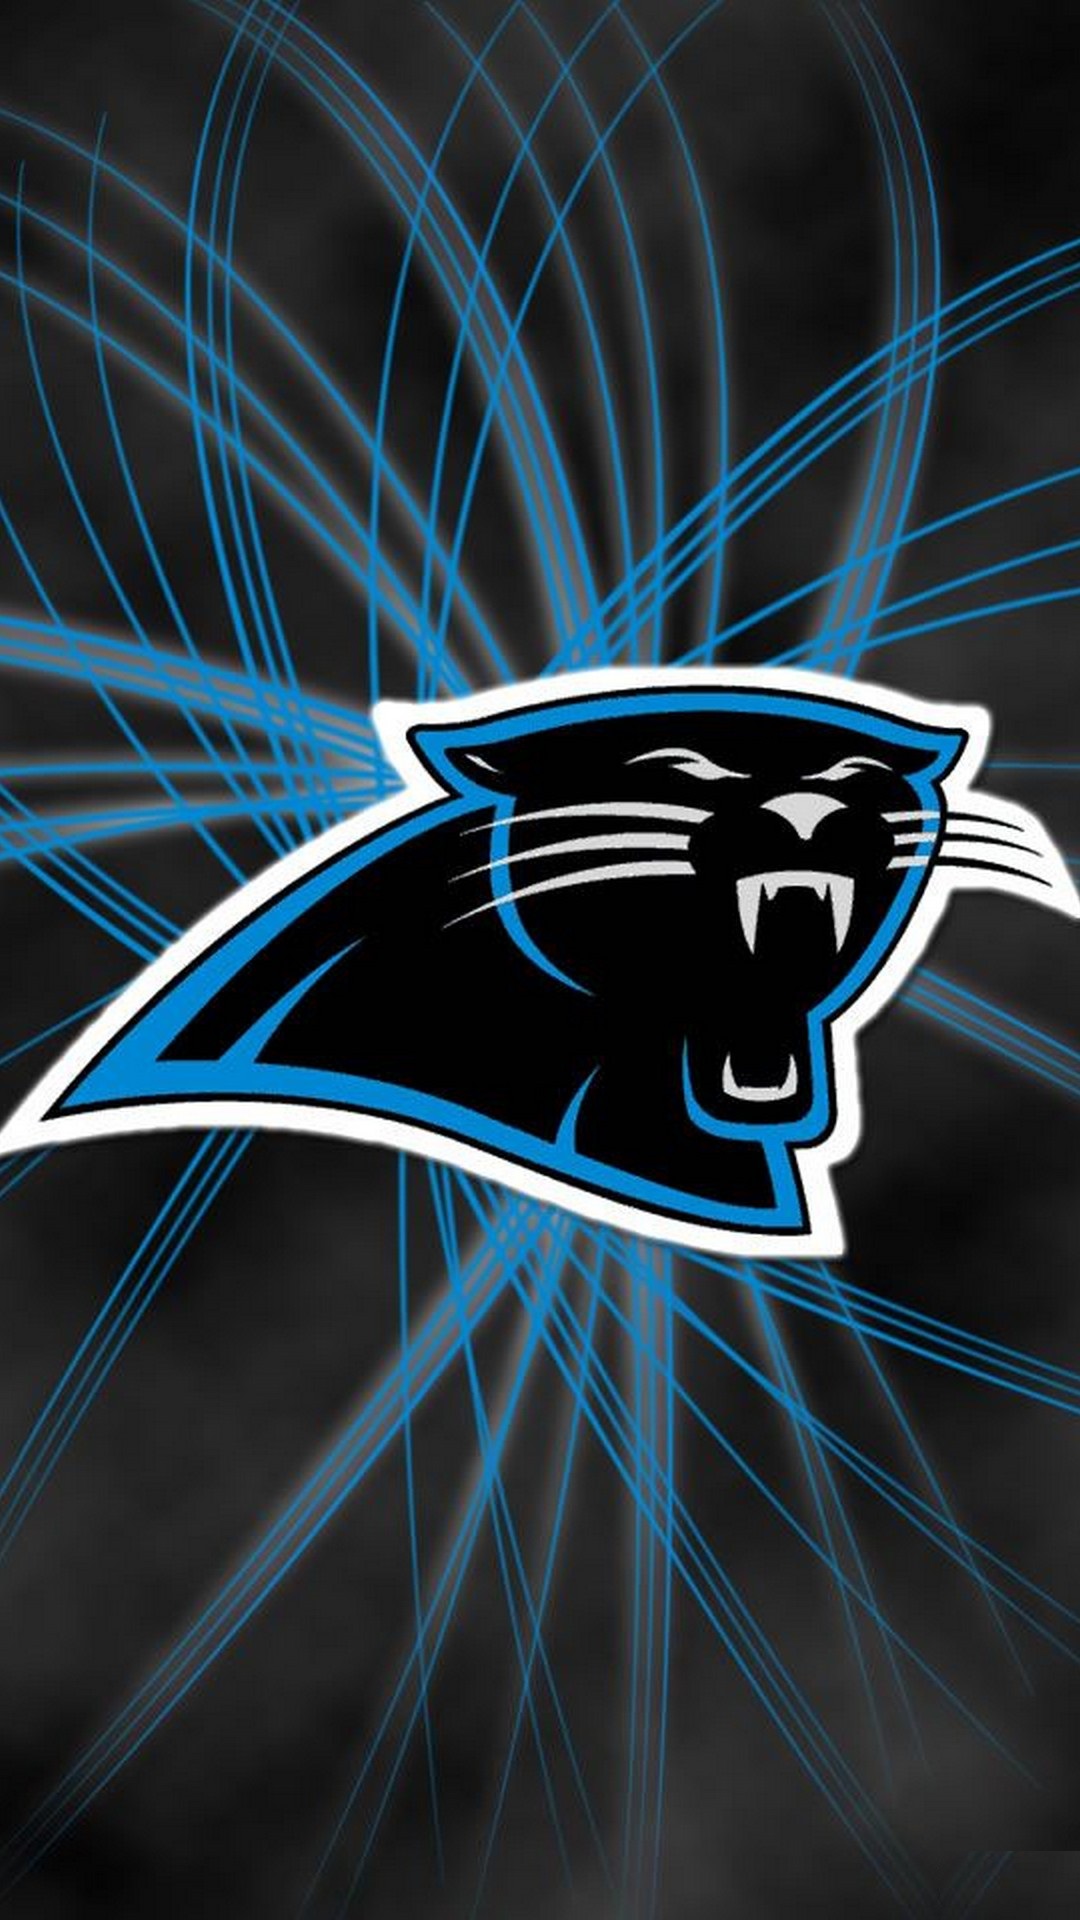 Carolina Panthers iPhone Wallpaper High Quality with high-resolution 1080x1920 pixel. Donwload and set as wallpaper for your iPhone X, iPhone XS home screen backgrounds, XS Max, XR, iPhone8 lock screen wallpaper, iPhone 7, 6, SE and other mobile devices